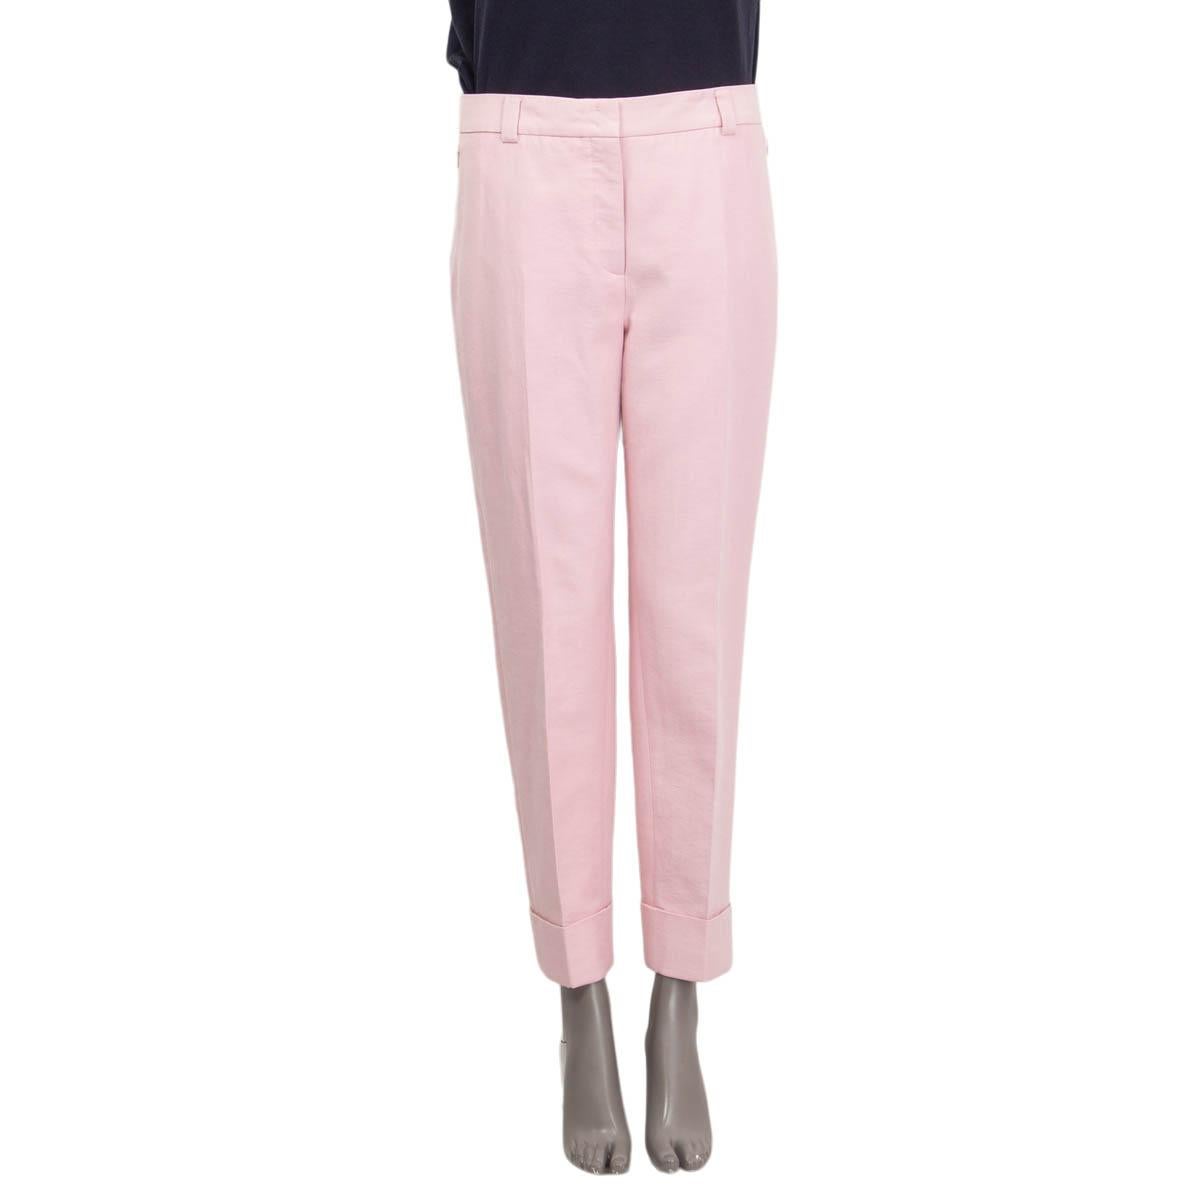 100% authentic Akris classic cuffed pants in Lilola (pink) cotton (59%), silk (39%) and nylon (2%). Cruise 2021 collection. Features two zipped pockets on the side. Opens with a concealed zipper, two hooks and a button on the front. Have been worn